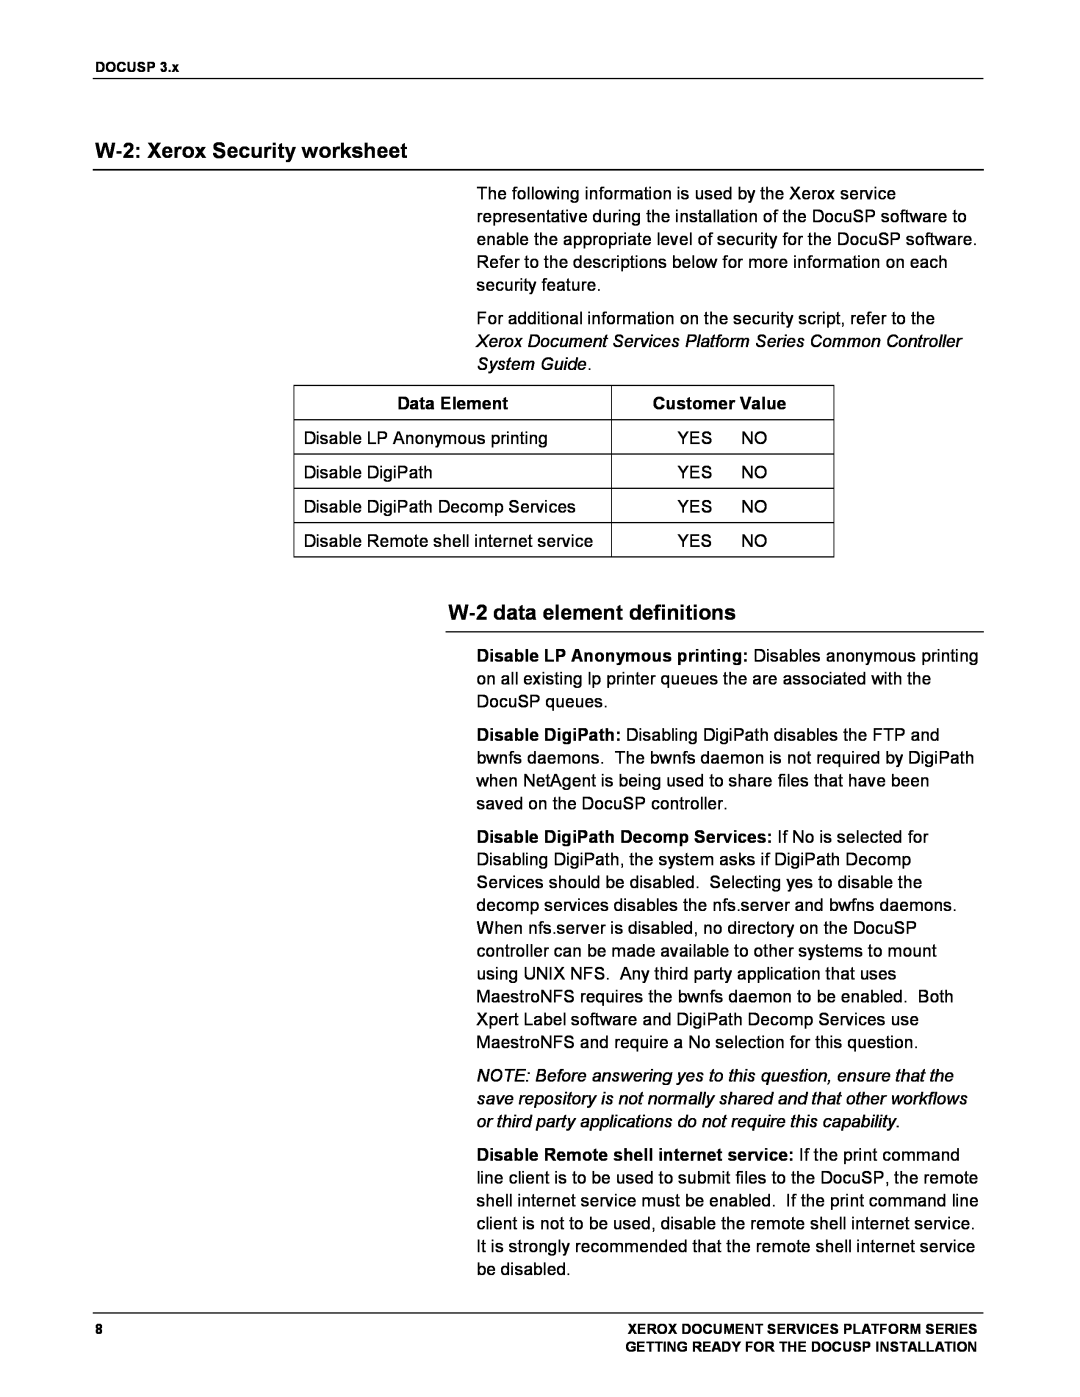 Xerox 701P38969 manual W-2:Xerox Security worksheet, W-2data element definitions, System Guide 